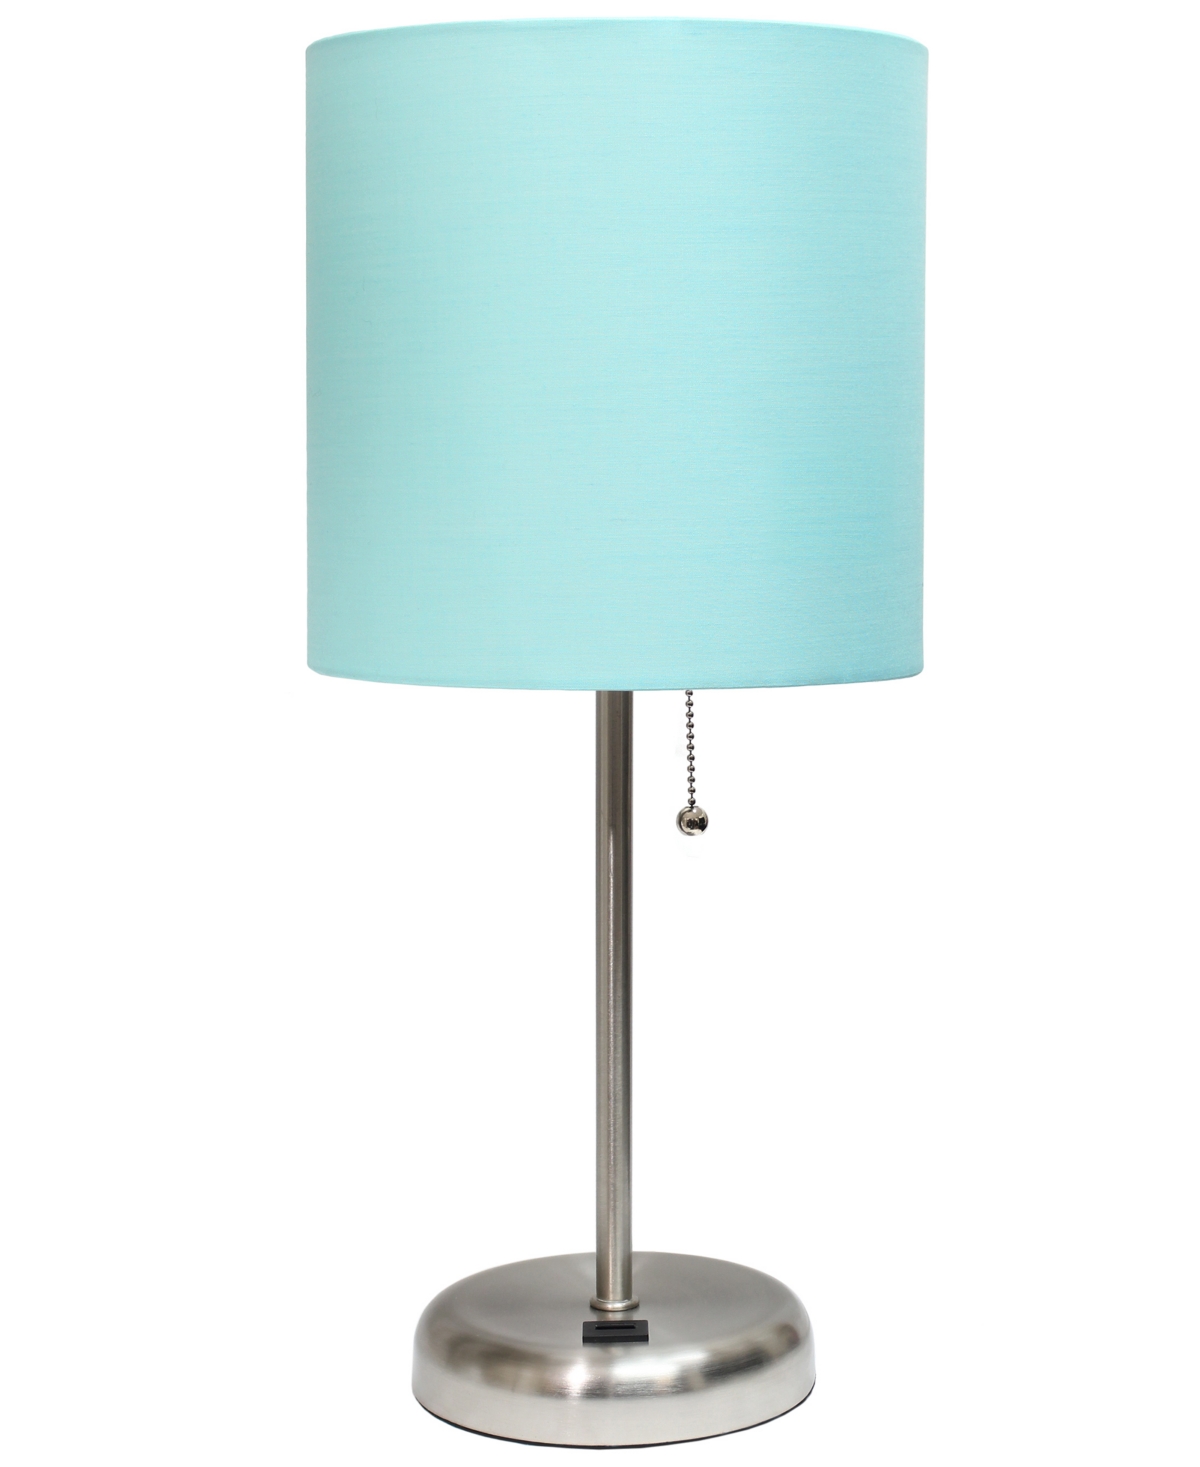 Limelights Stick Lamp With Usb Charging Port In Aqua Shade,brushed Steel Base